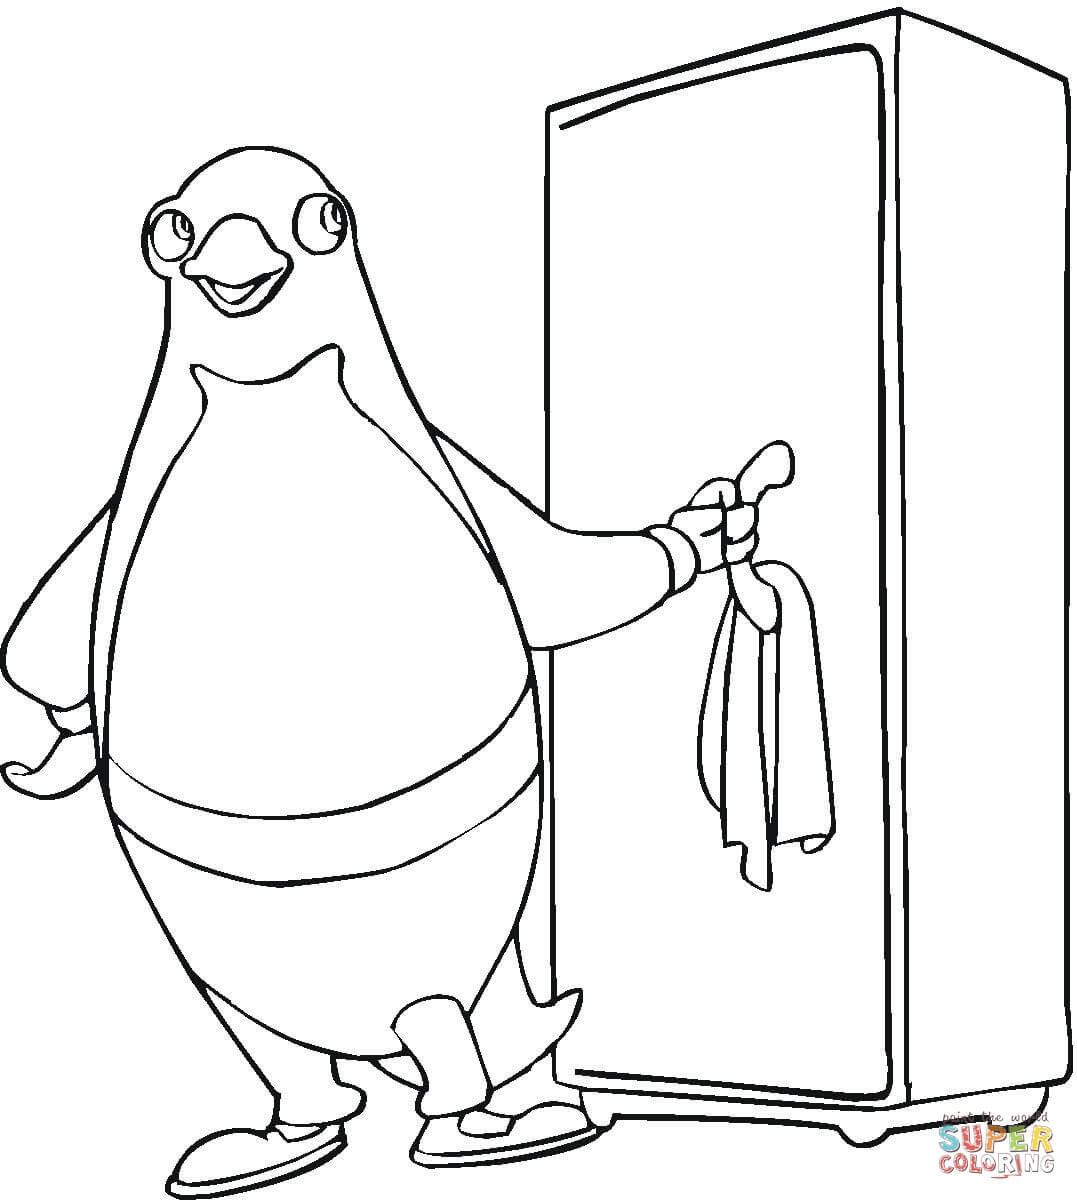 Fridge Coloring Pages - Coloring Home